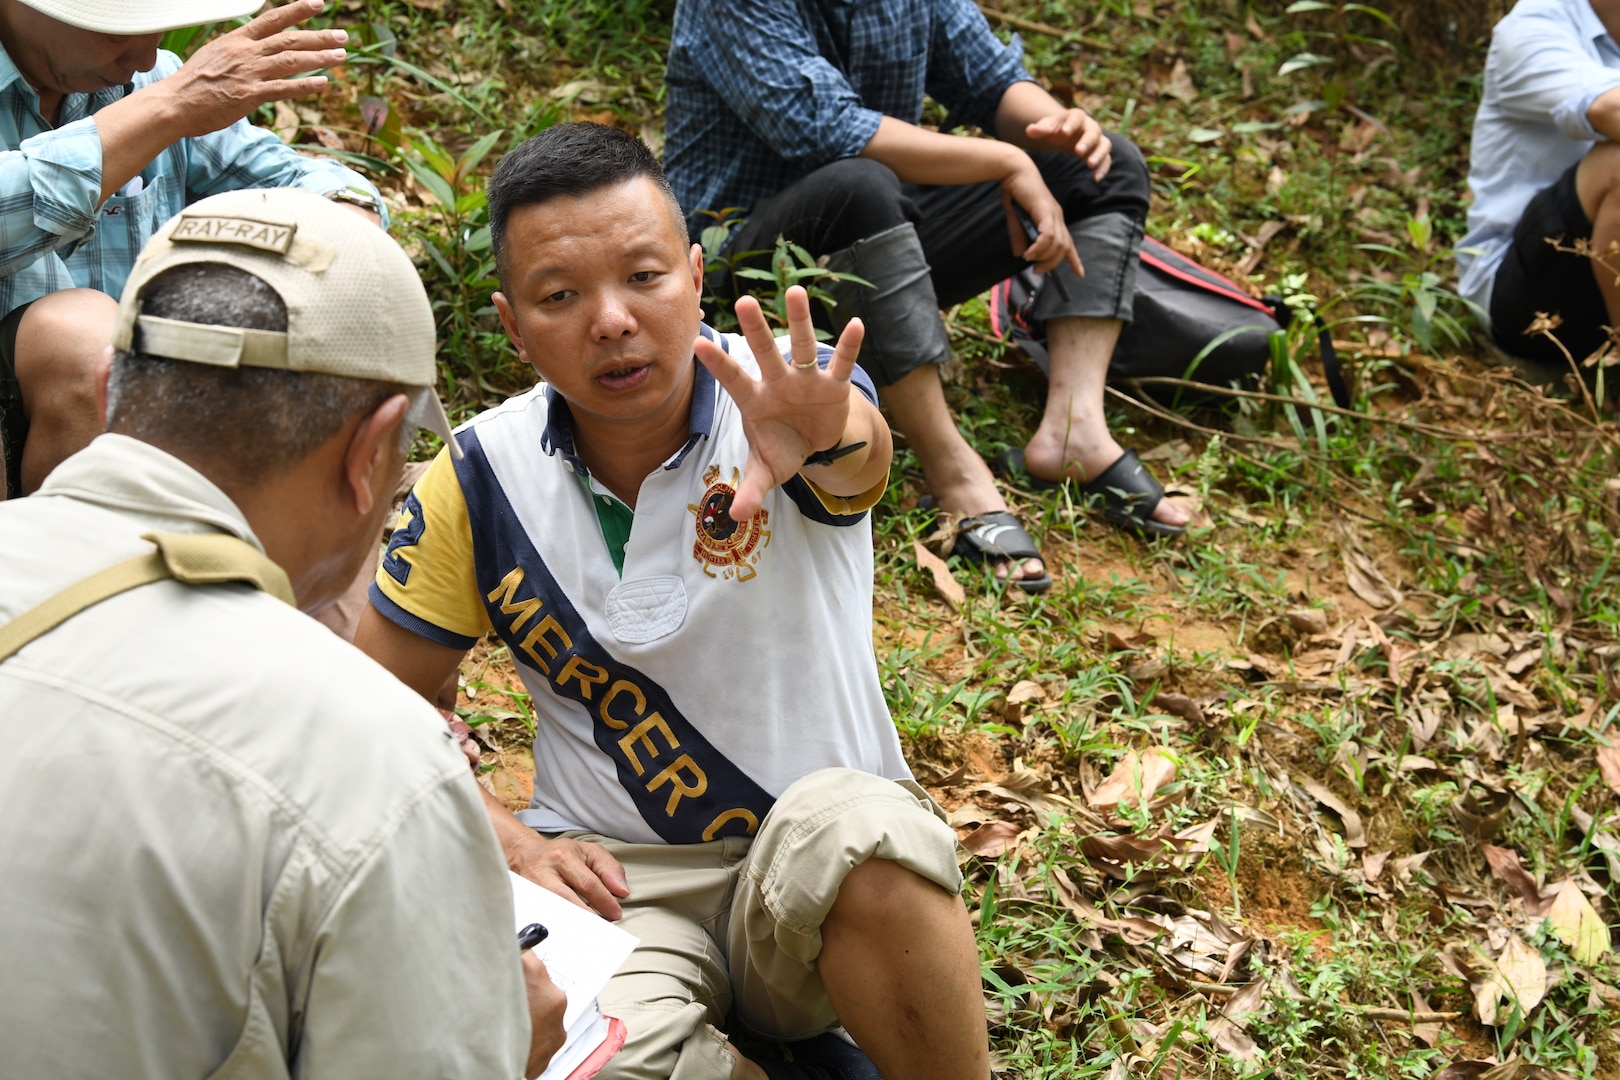 U.S. Army Sgt. 1st Class Kelvin Ngo, a linguist with the Defense POW/MIA Accounting Agency (DPAA) translates a witness account to Ray Kern, a DPAA analyst, during an investigation in Quang Nam province, Socialist Republic of Vietnam, June 17, 2019. DPAA was in the region conducting investigations in search of servicemembers who went missing during the Vietnam War. DPAA's mission is to provide the fullest possible accounting for our missing personnel to their families and the nation. (U.S. Navy photo by Mass Communication Specialist 1st Class Amara Timberlake)